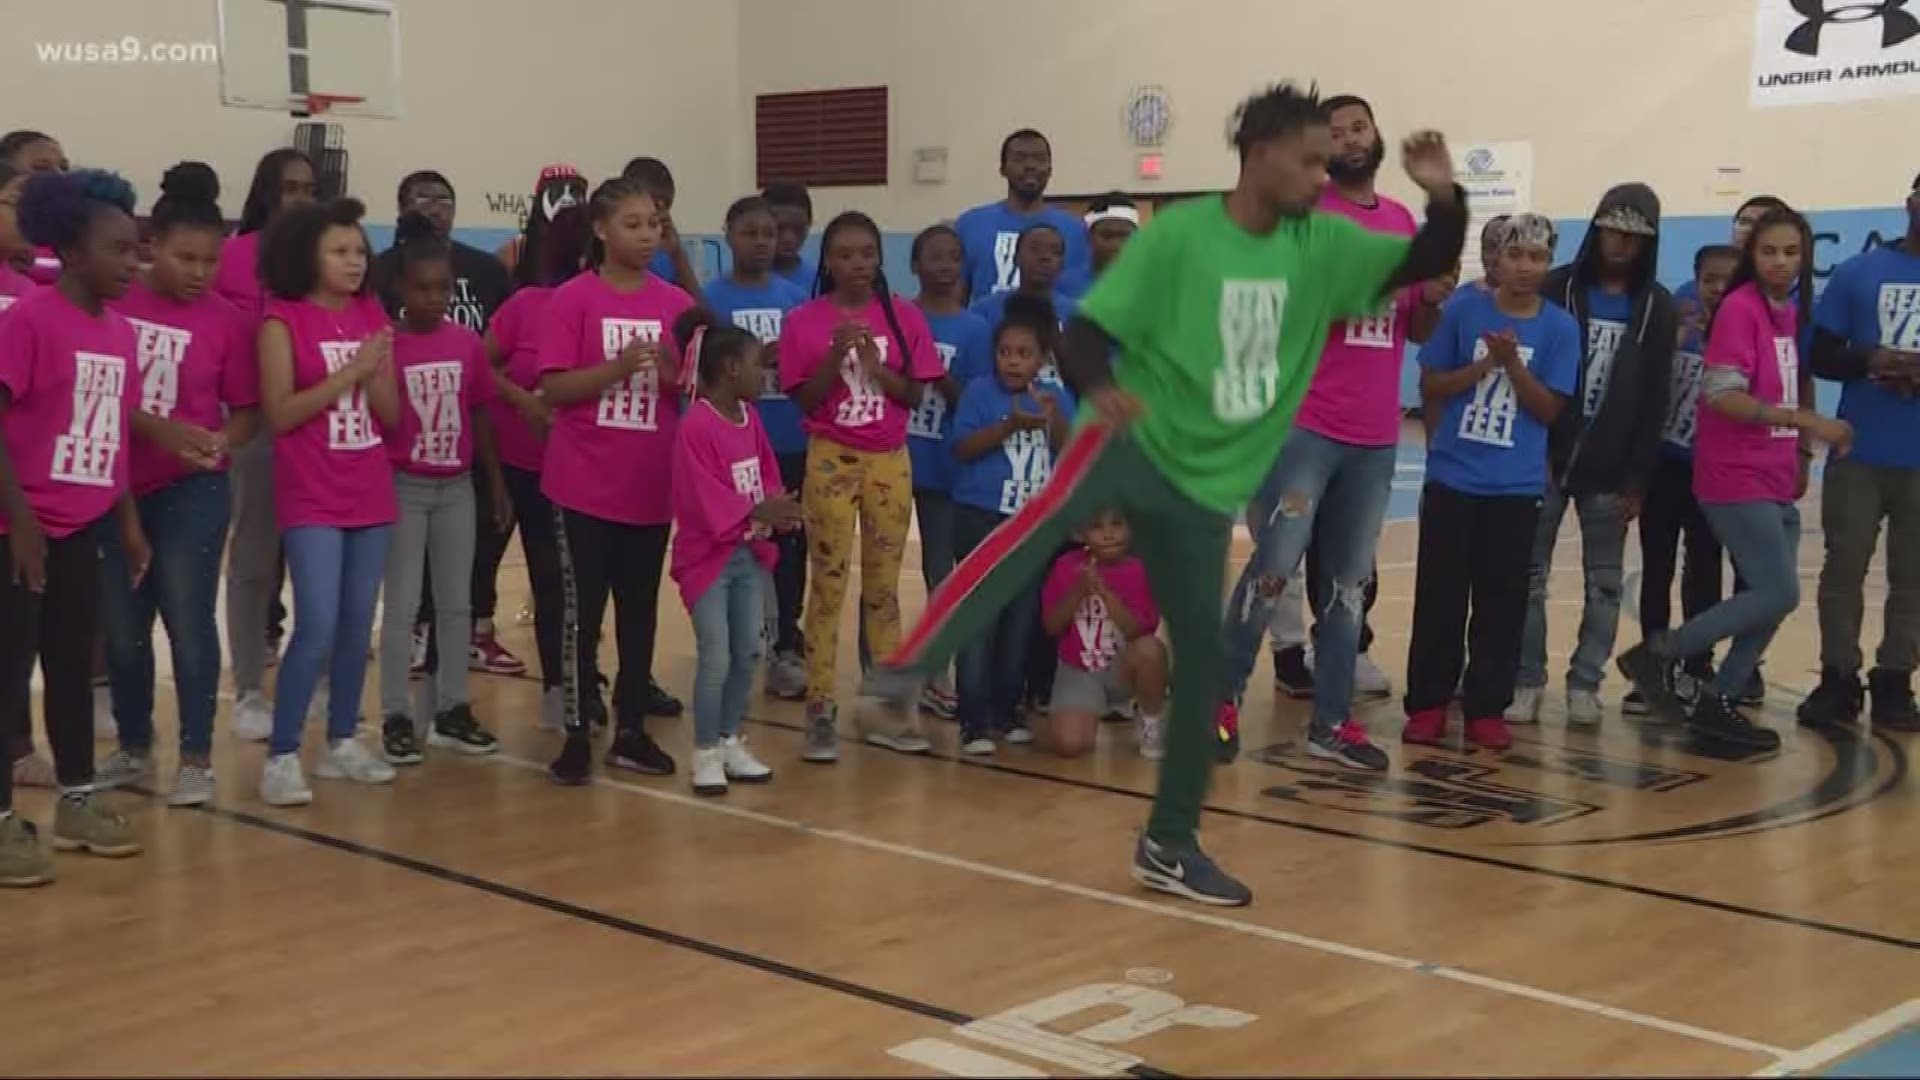 DC dance group keeping kids off the streets | wusa9.com